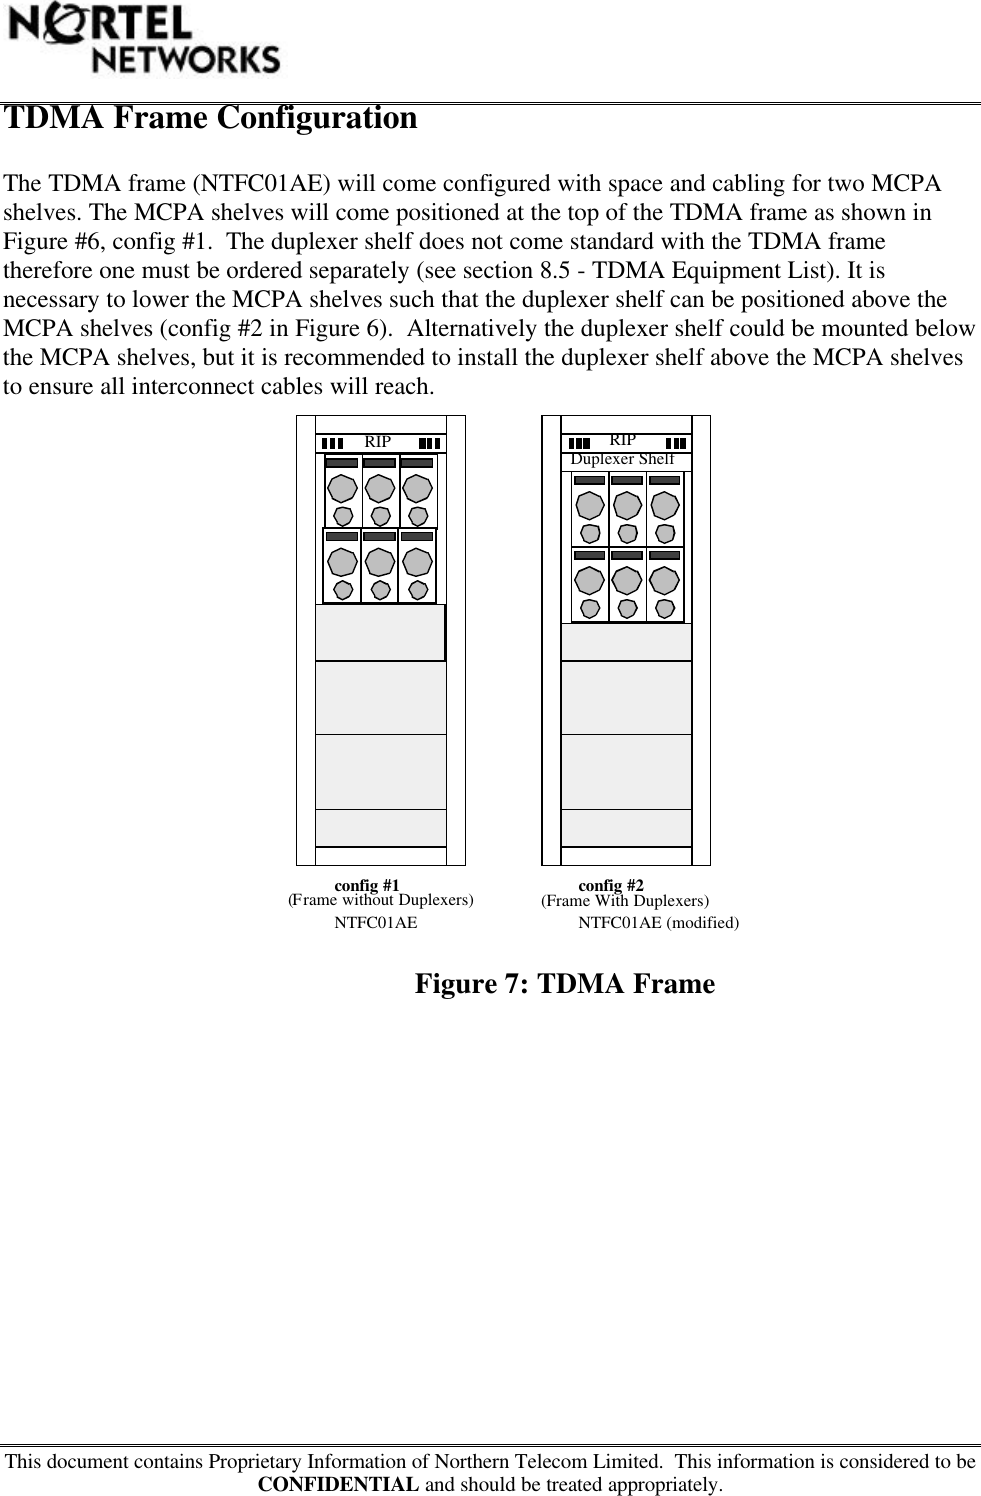 This document contains Proprietary Information of Northern Telecom Limited.  This information is considered to beCONFIDENTIAL and should be treated appropriately.TDMA Frame ConfigurationThe TDMA frame (NTFC01AE) will come configured with space and cabling for two MCPAshelves. The MCPA shelves will come positioned at the top of the TDMA frame as shown inFigure #6, config #1.  The duplexer shelf does not come standard with the TDMA frametherefore one must be ordered separately (see section 8.5 - TDMA Equipment List). It isnecessary to lower the MCPA shelves such that the duplexer shelf can be positioned above theMCPA shelves (config #2 in Figure 6).  Alternatively the duplexer shelf could be mounted belowthe MCPA shelves, but it is recommended to install the duplexer shelf above the MCPA shelvesto ensure all interconnect cables will reach.Figure 7: TDMA FrameRIP RIPDuplexer Shelf(Frame without Duplexers) (Frame With Duplexers)config #1 config #2NTFC01AE NTFC01AE (modified)